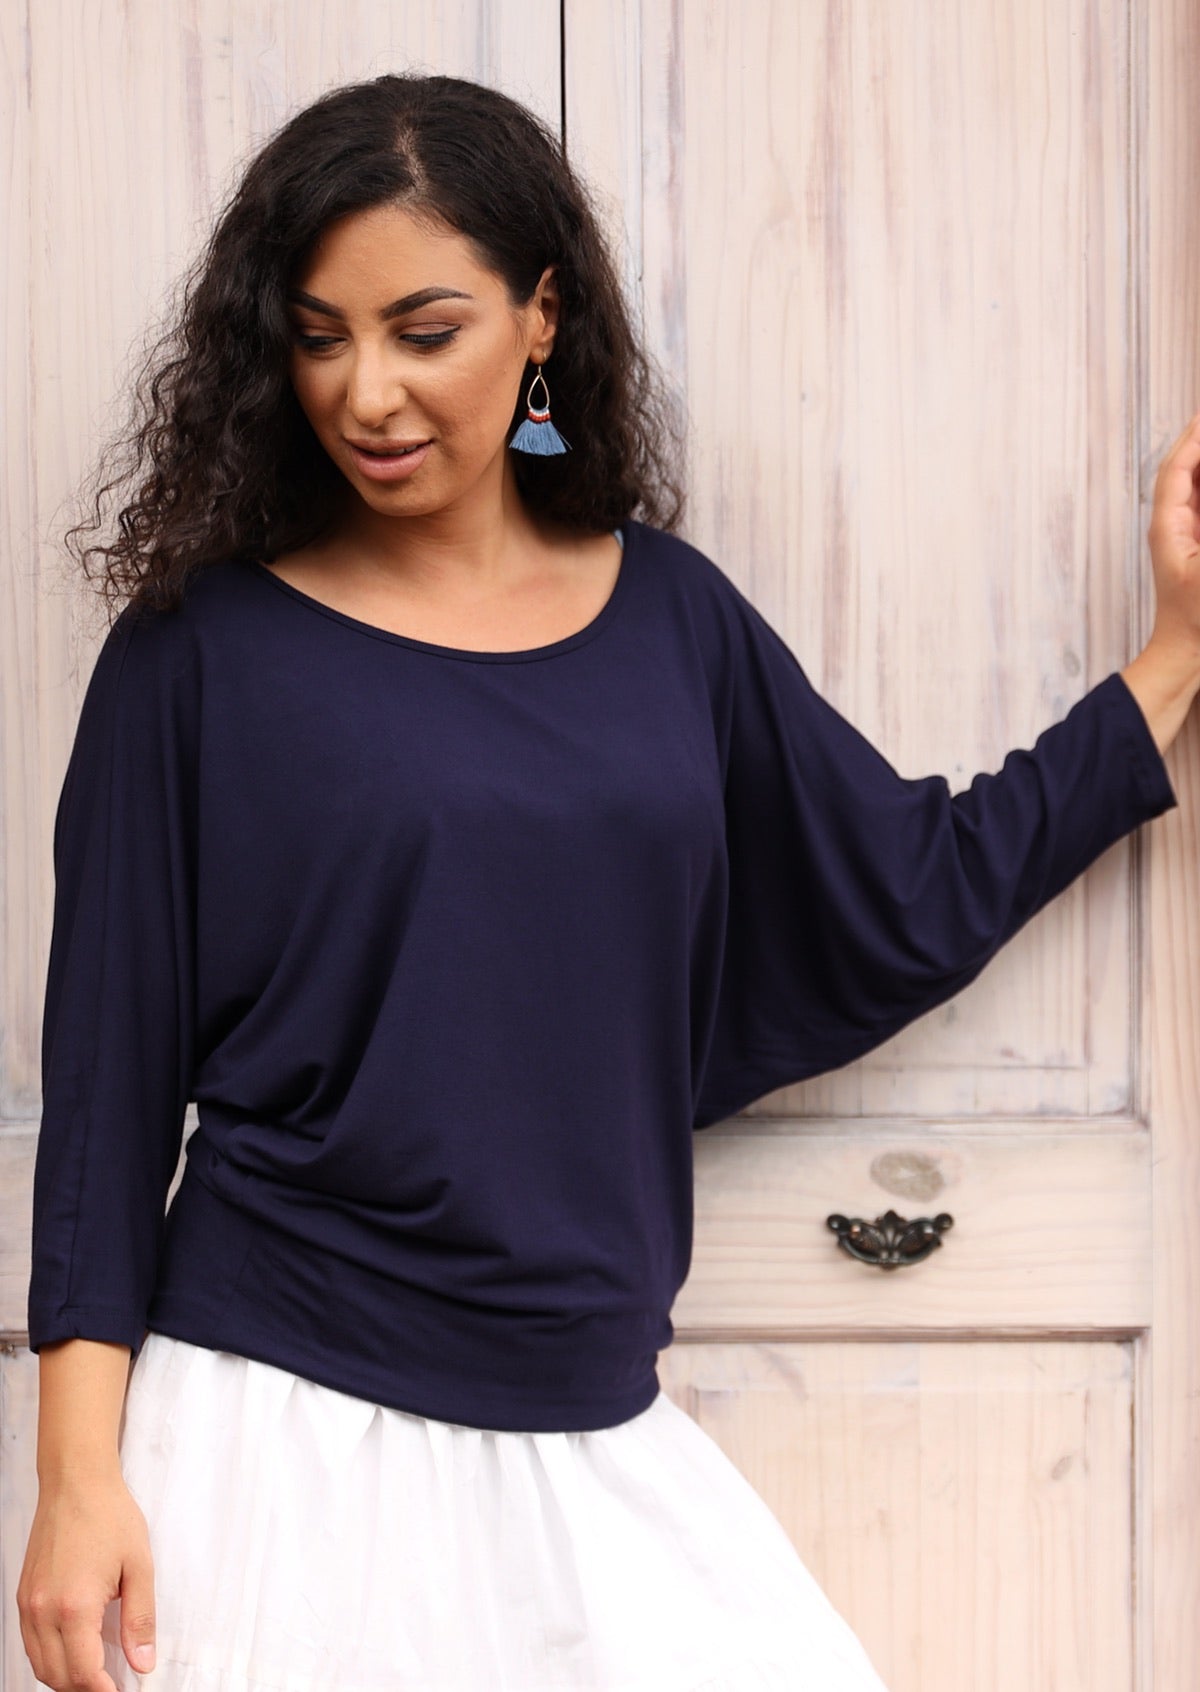 Woman wearing a 3/4 sleeve rayon batwing round neckline navy blue top and blue earrings.